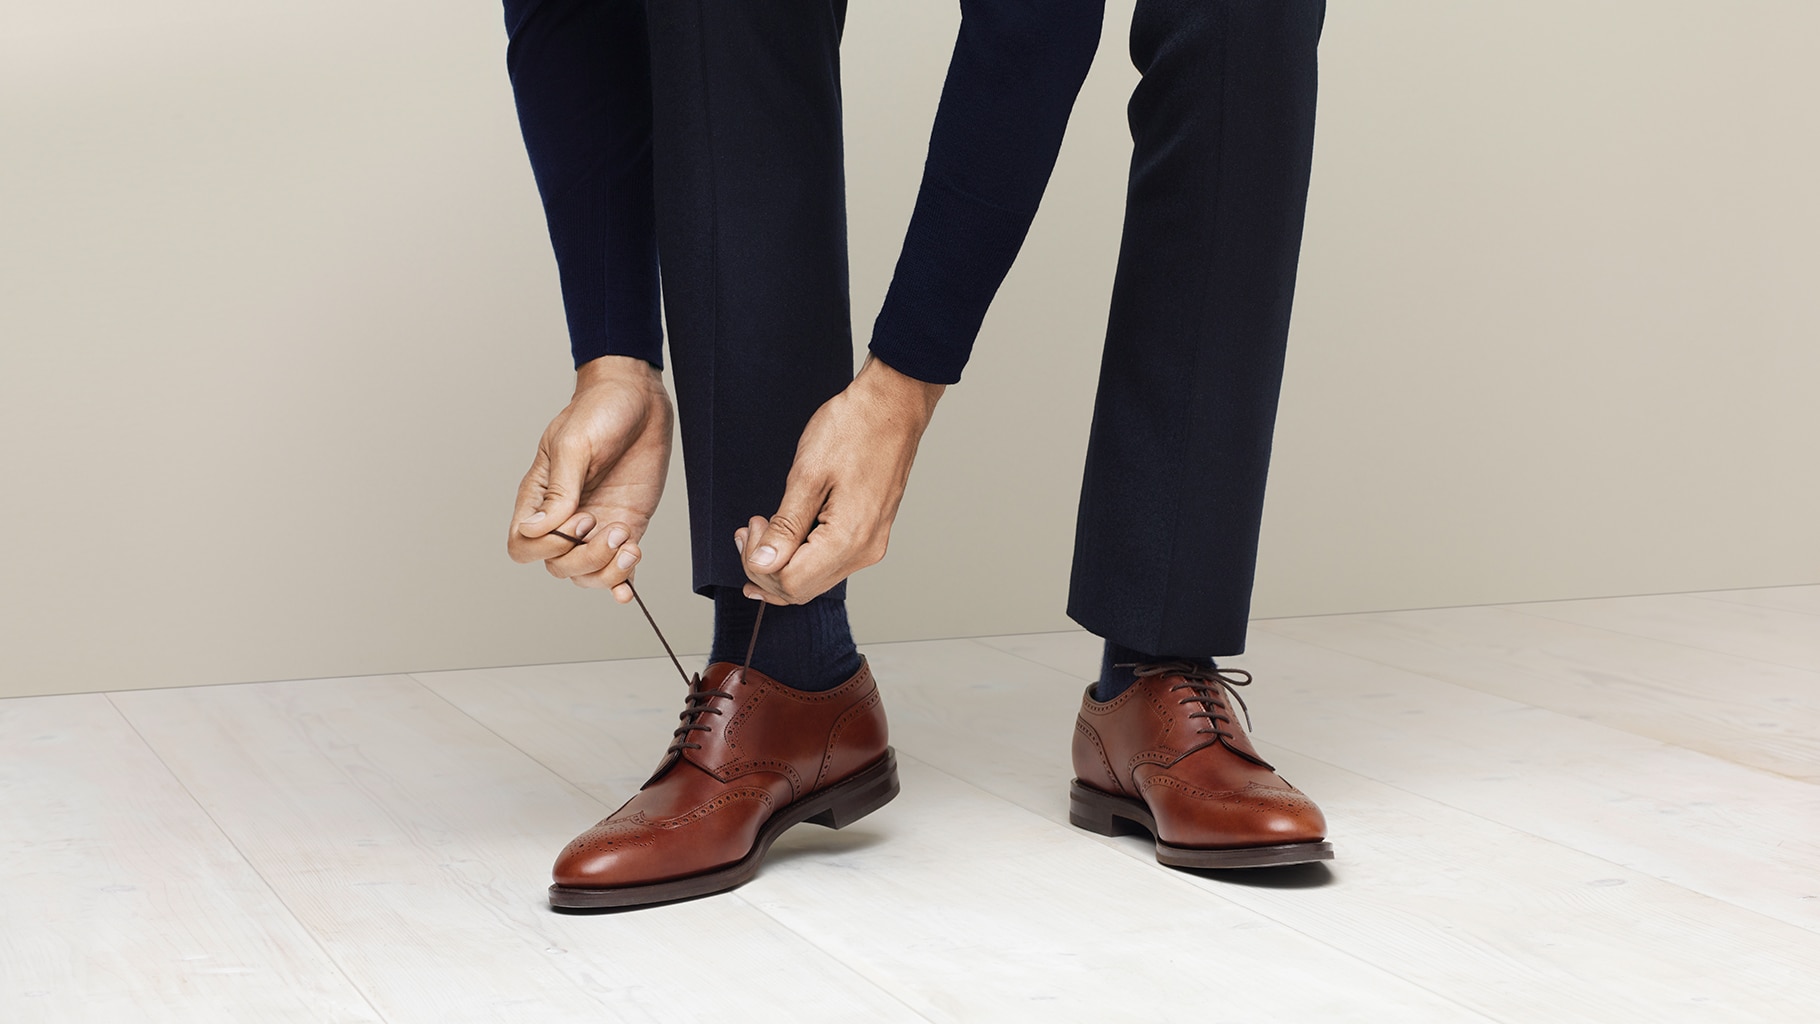 The World's Best Shoes | The Journal | MR PORTER